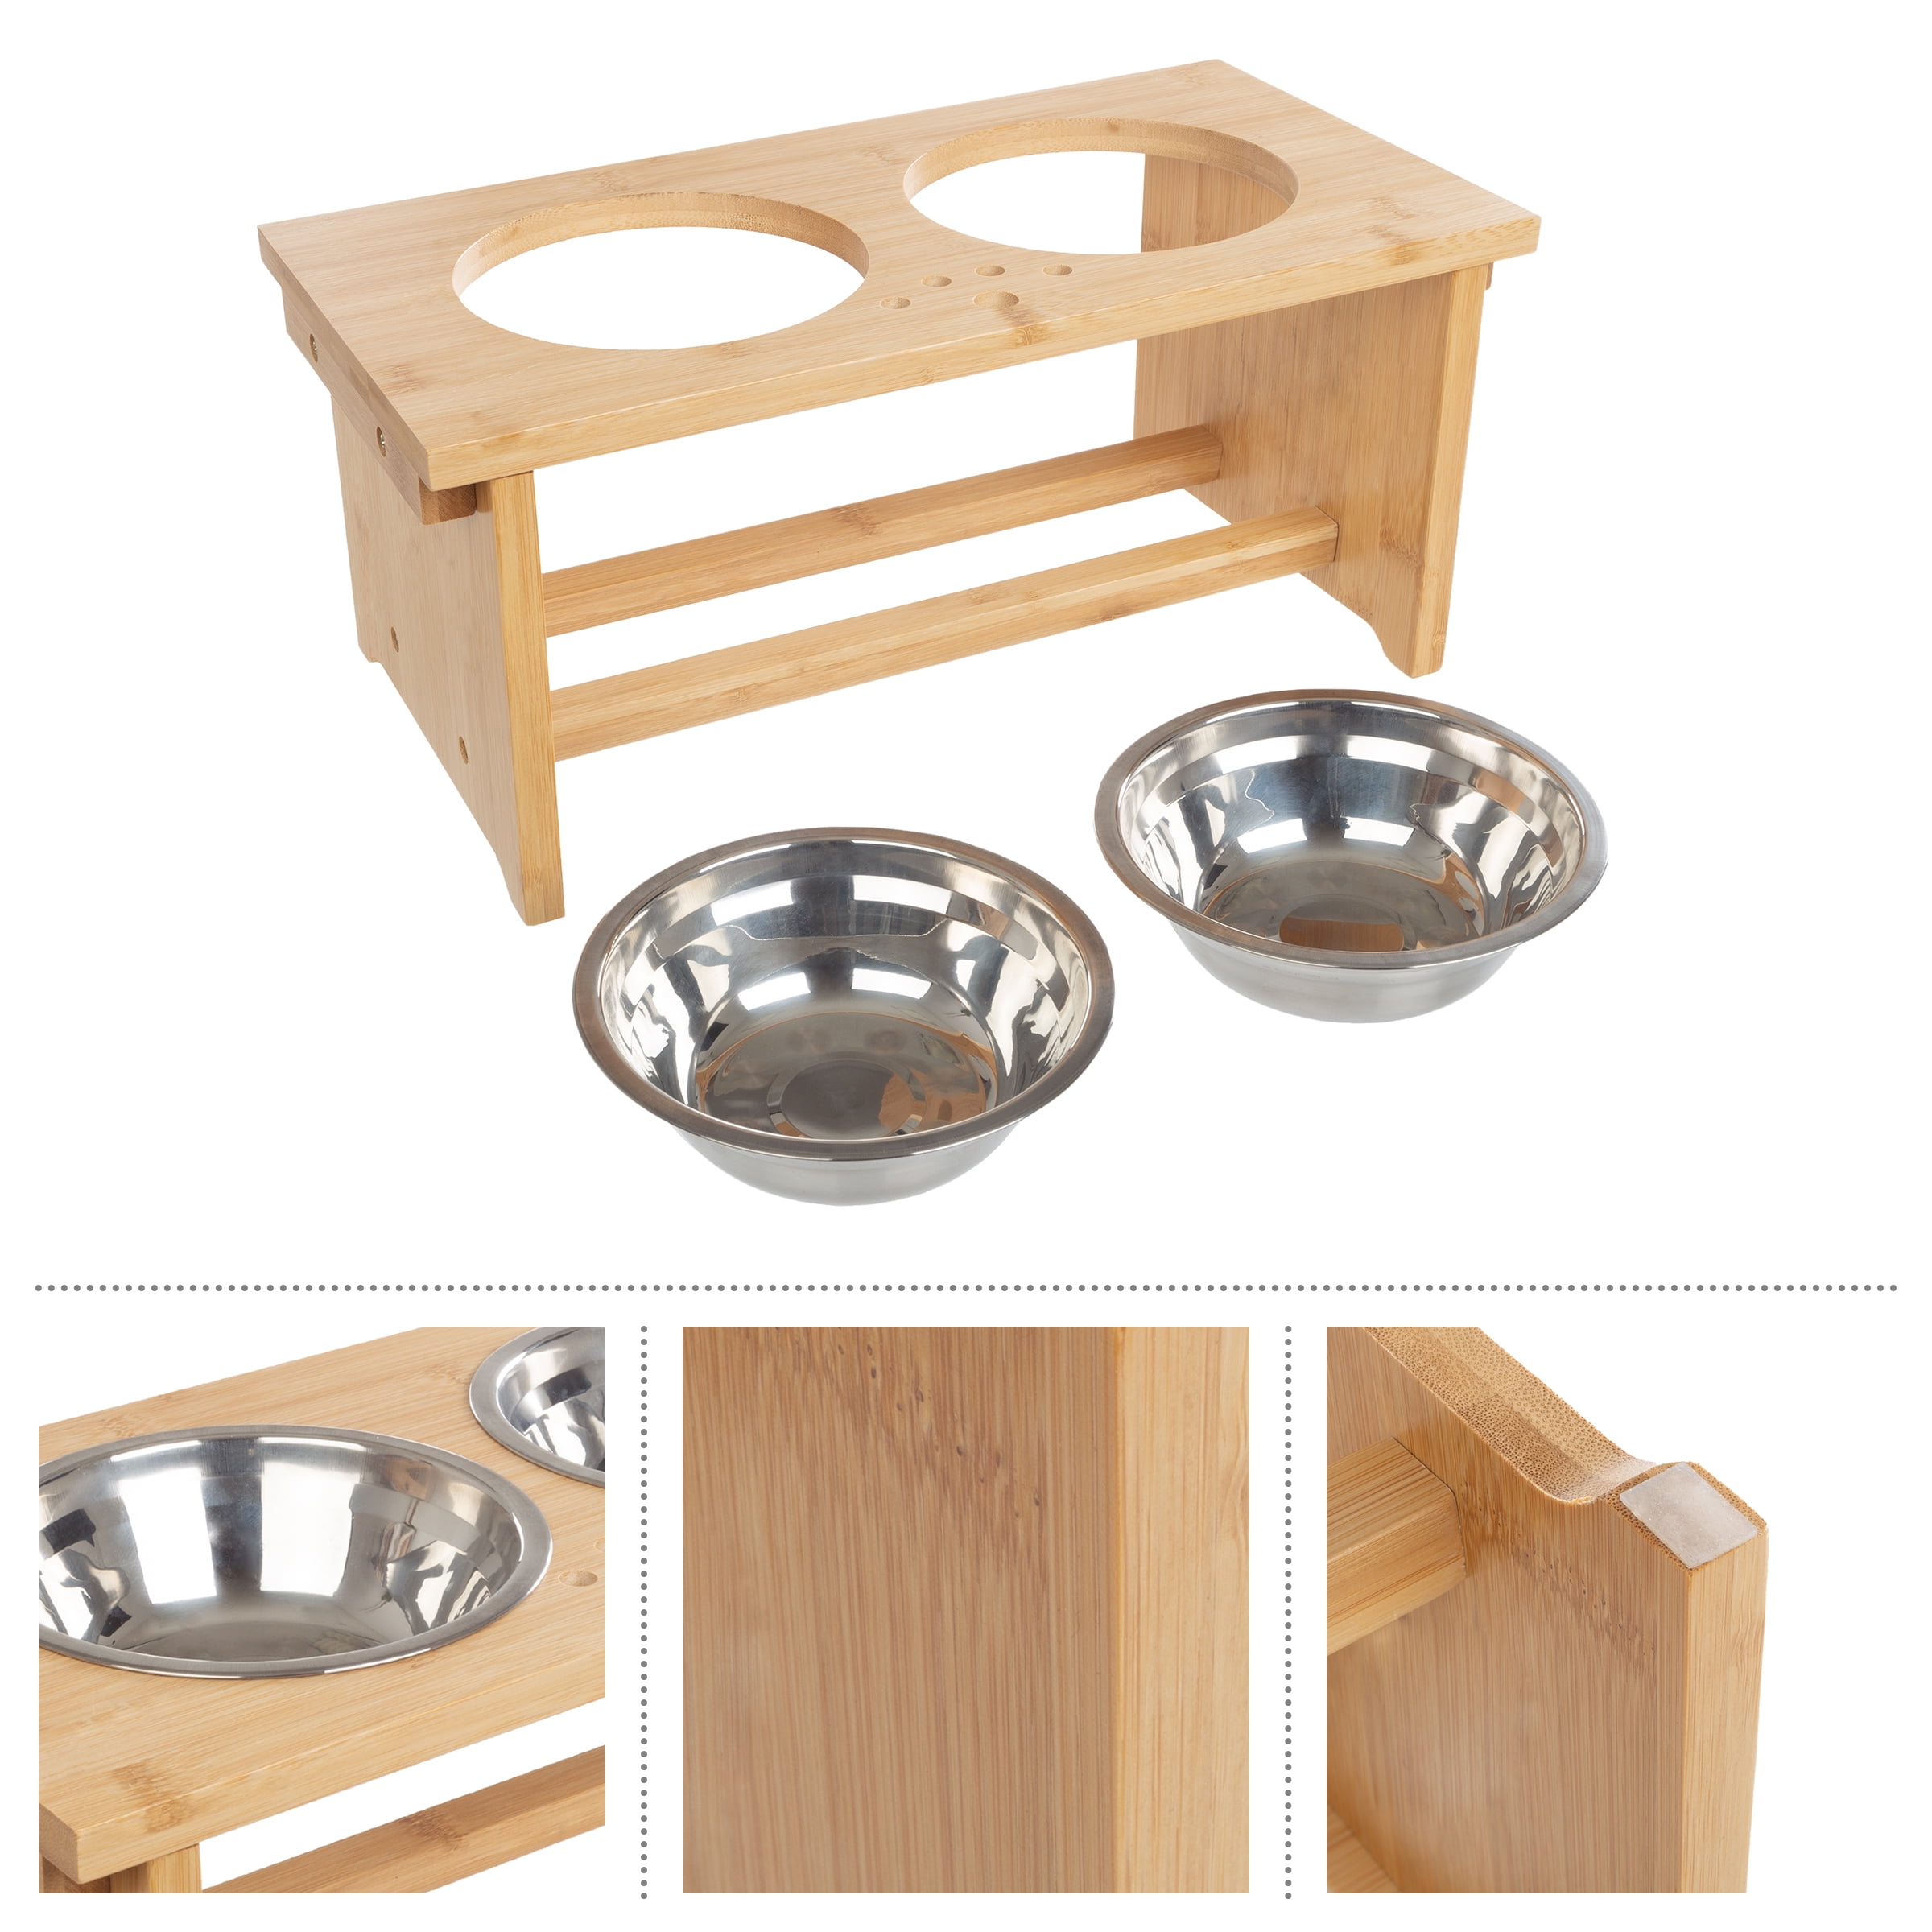 Niubya Elevated Dog Bowls with 2 Stainless Steel Dog Food Bowls, Raised Dog  Bowl Adjusts to 5 Heights (3.15, 8.66, 9.84,11.02, 12.2) for Small